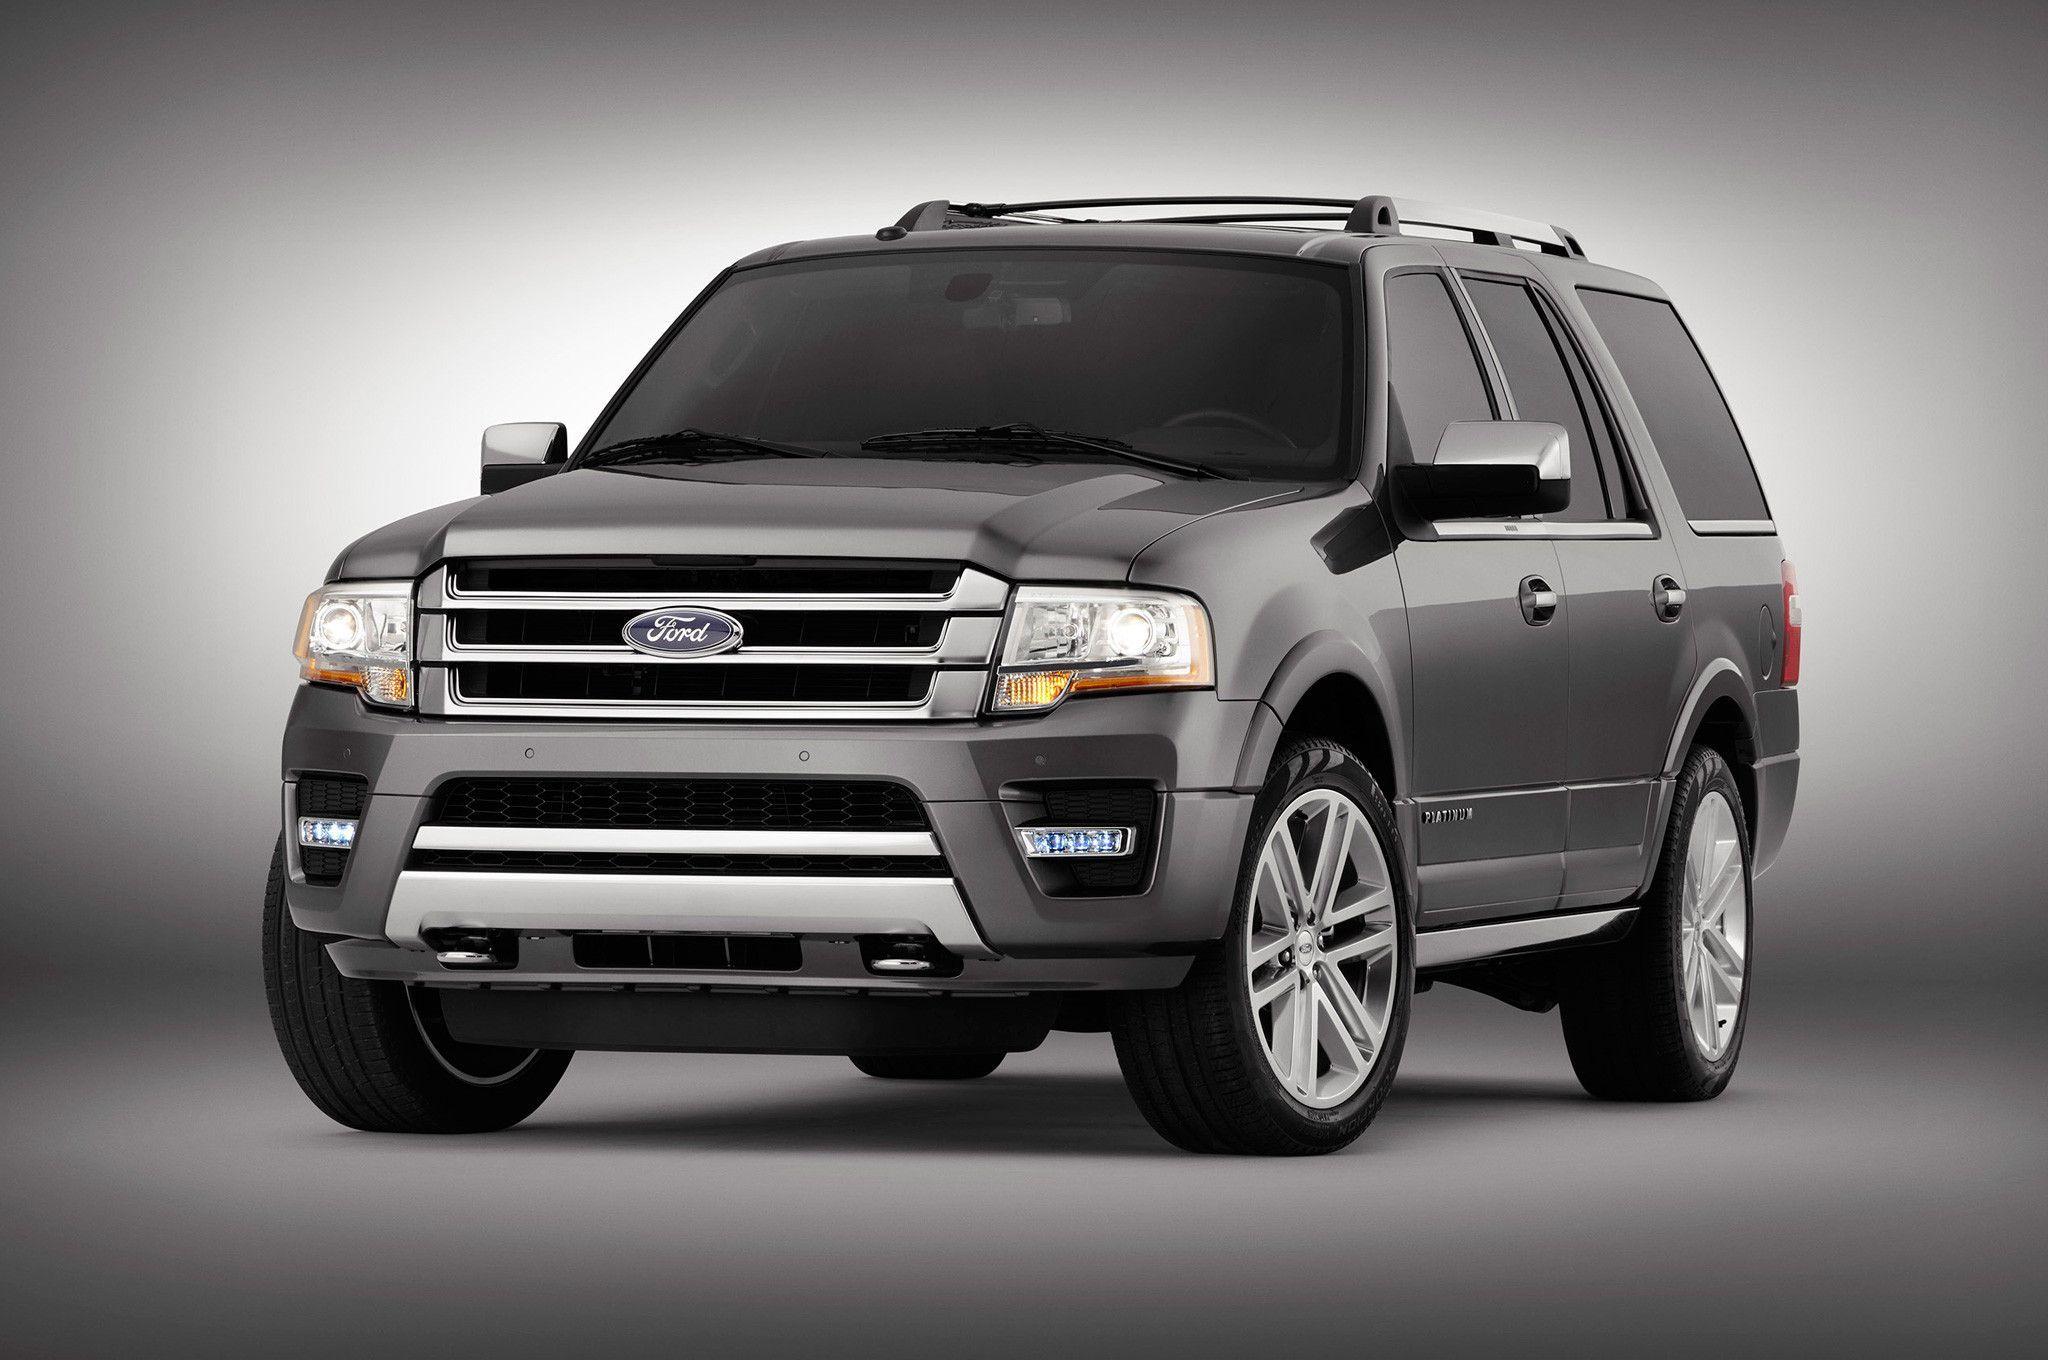 Ford Expedition Background Wallpaper For Wallpaper